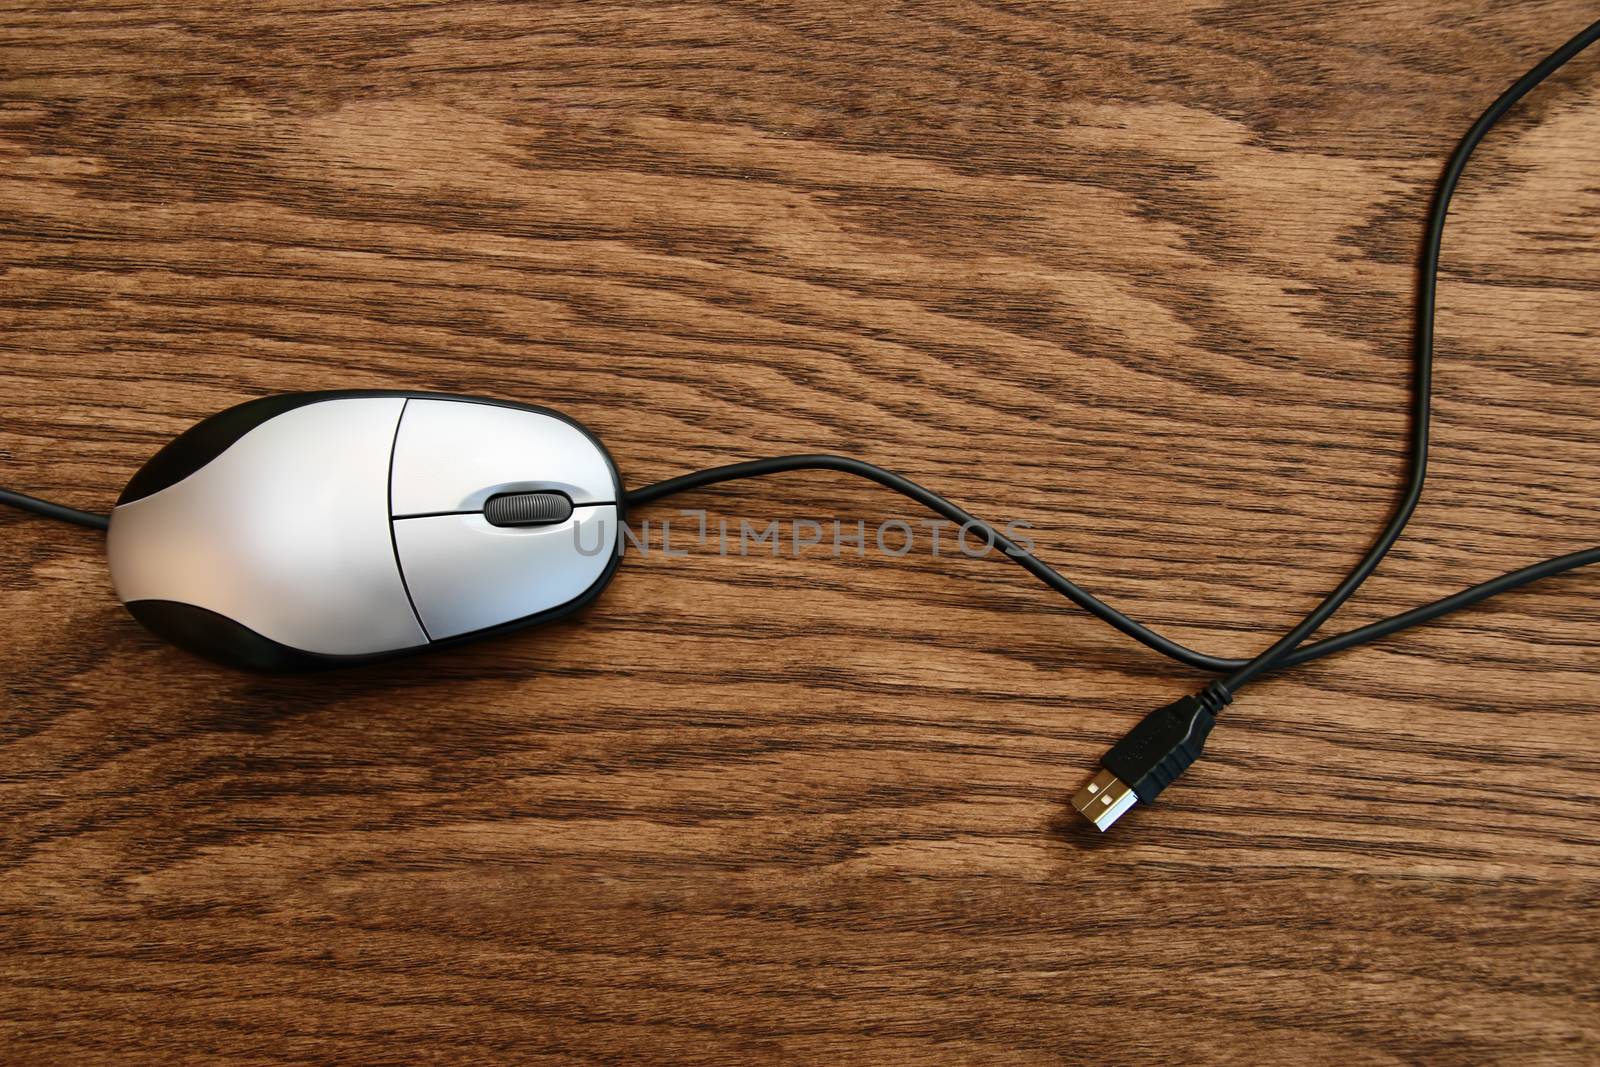 Computer mouse on wooden oak surface